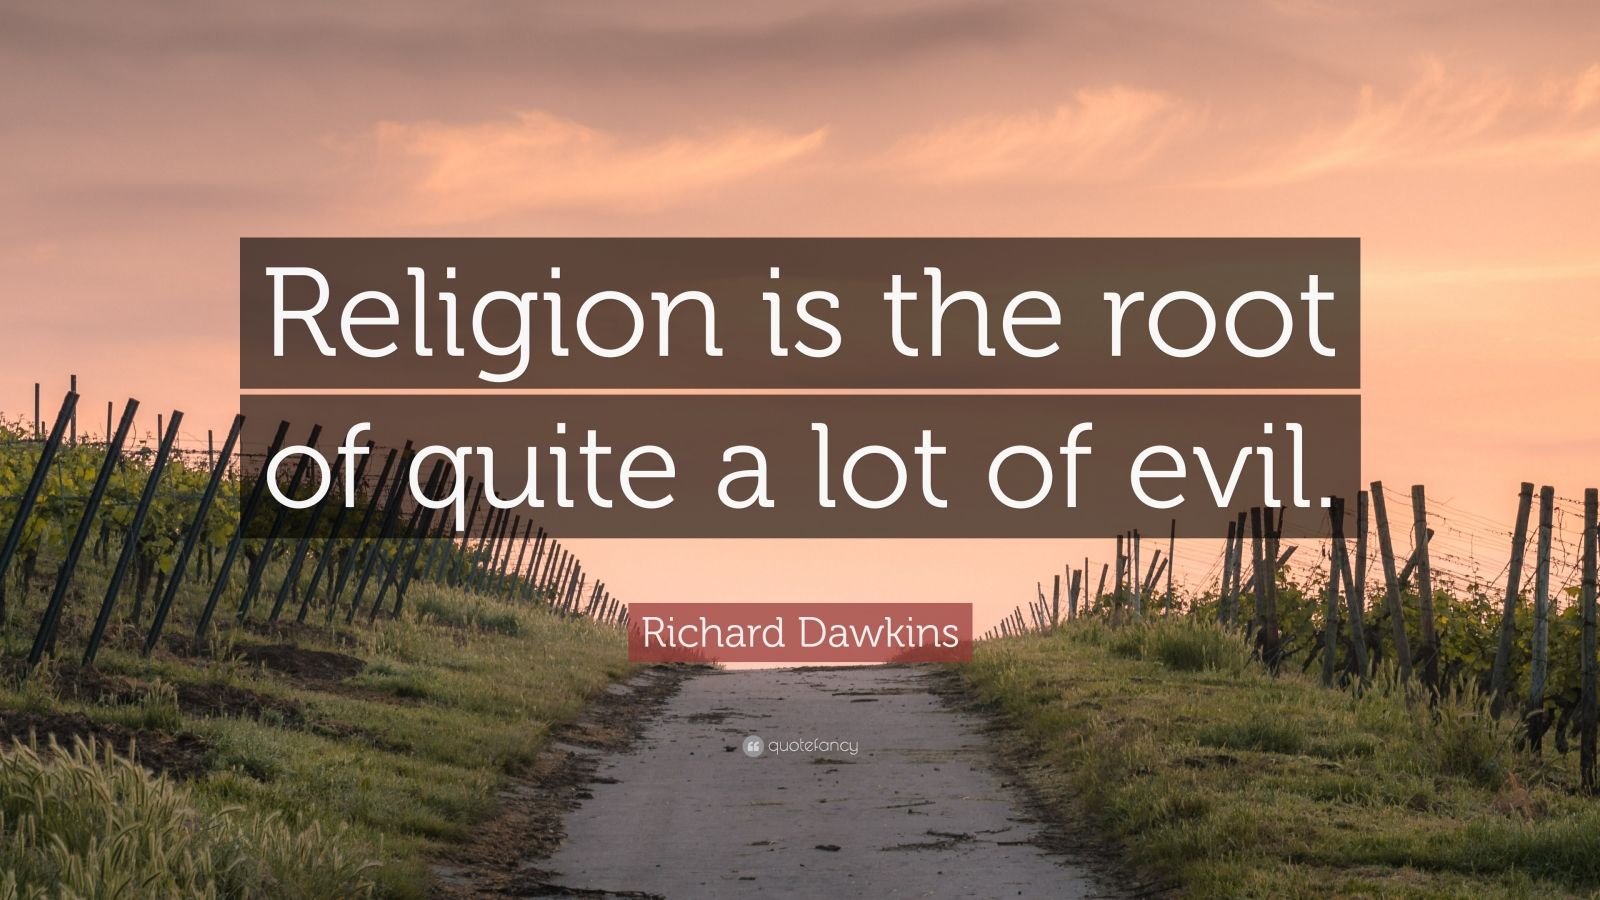 Richard Dawkins Quote: “Religion is the root of quite a lot of evil ...